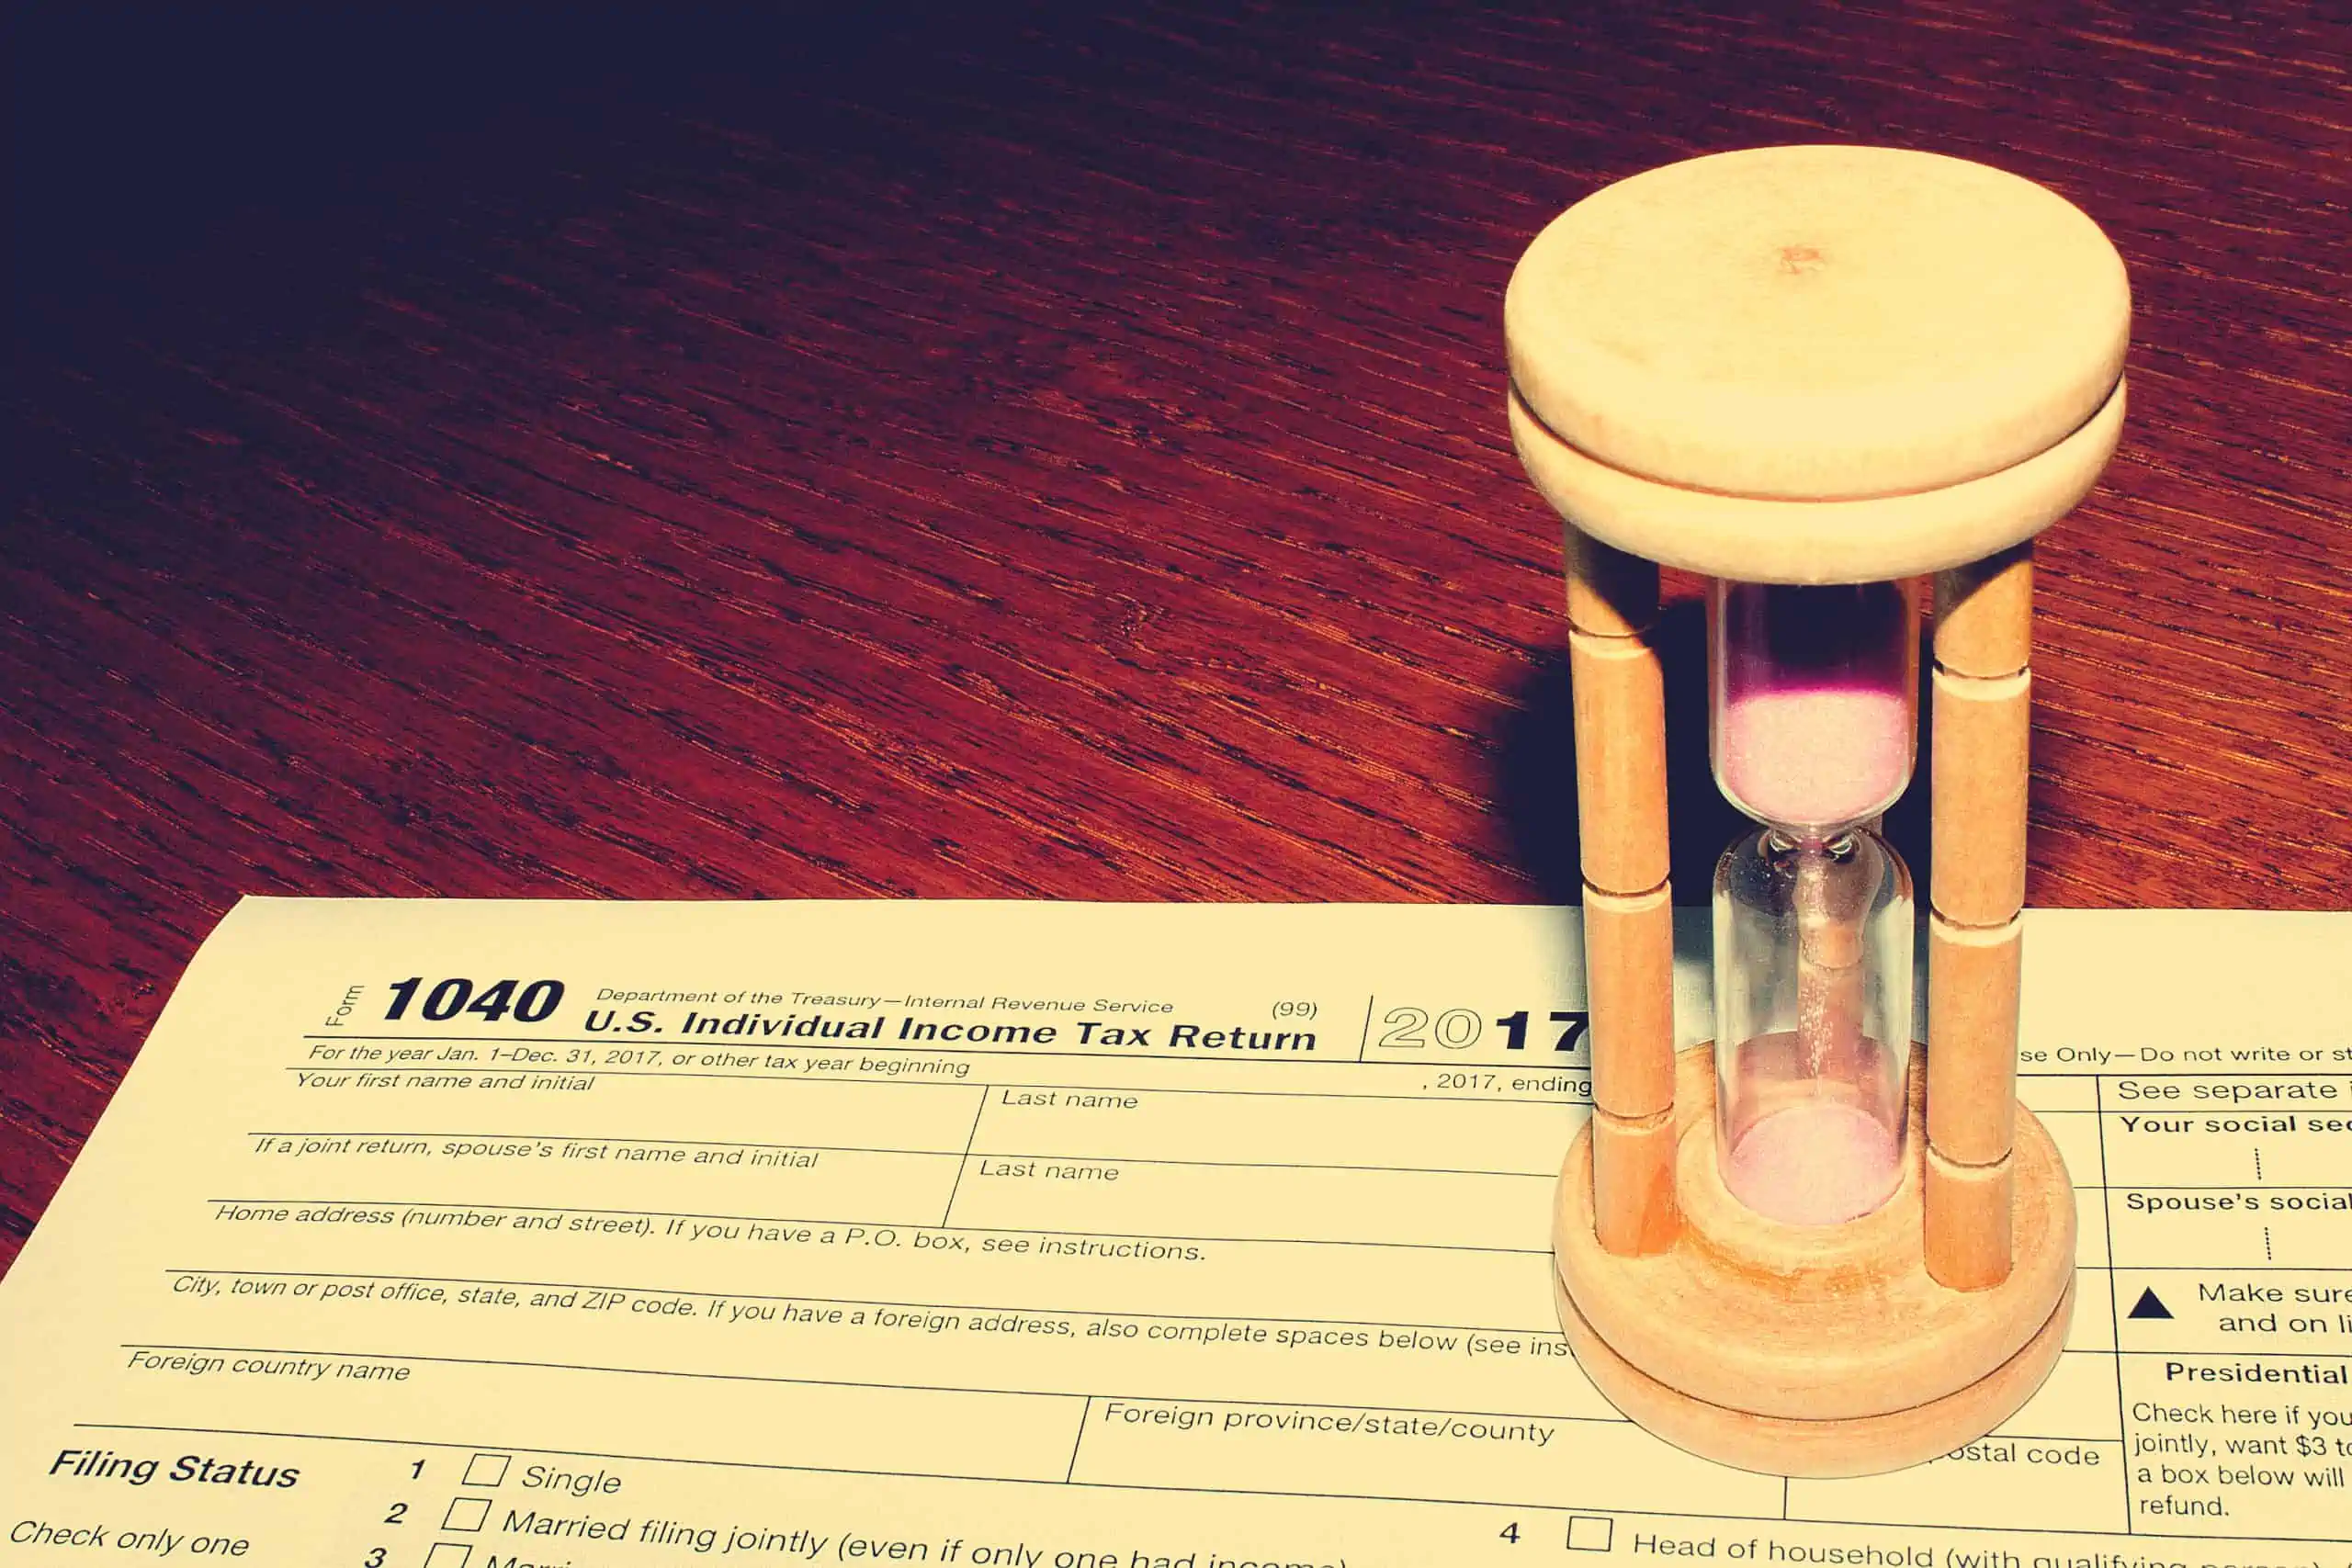 Income Tax Return, IRS Form 1040, on a red wood table with an hourglass running out, representing time for a tax extension